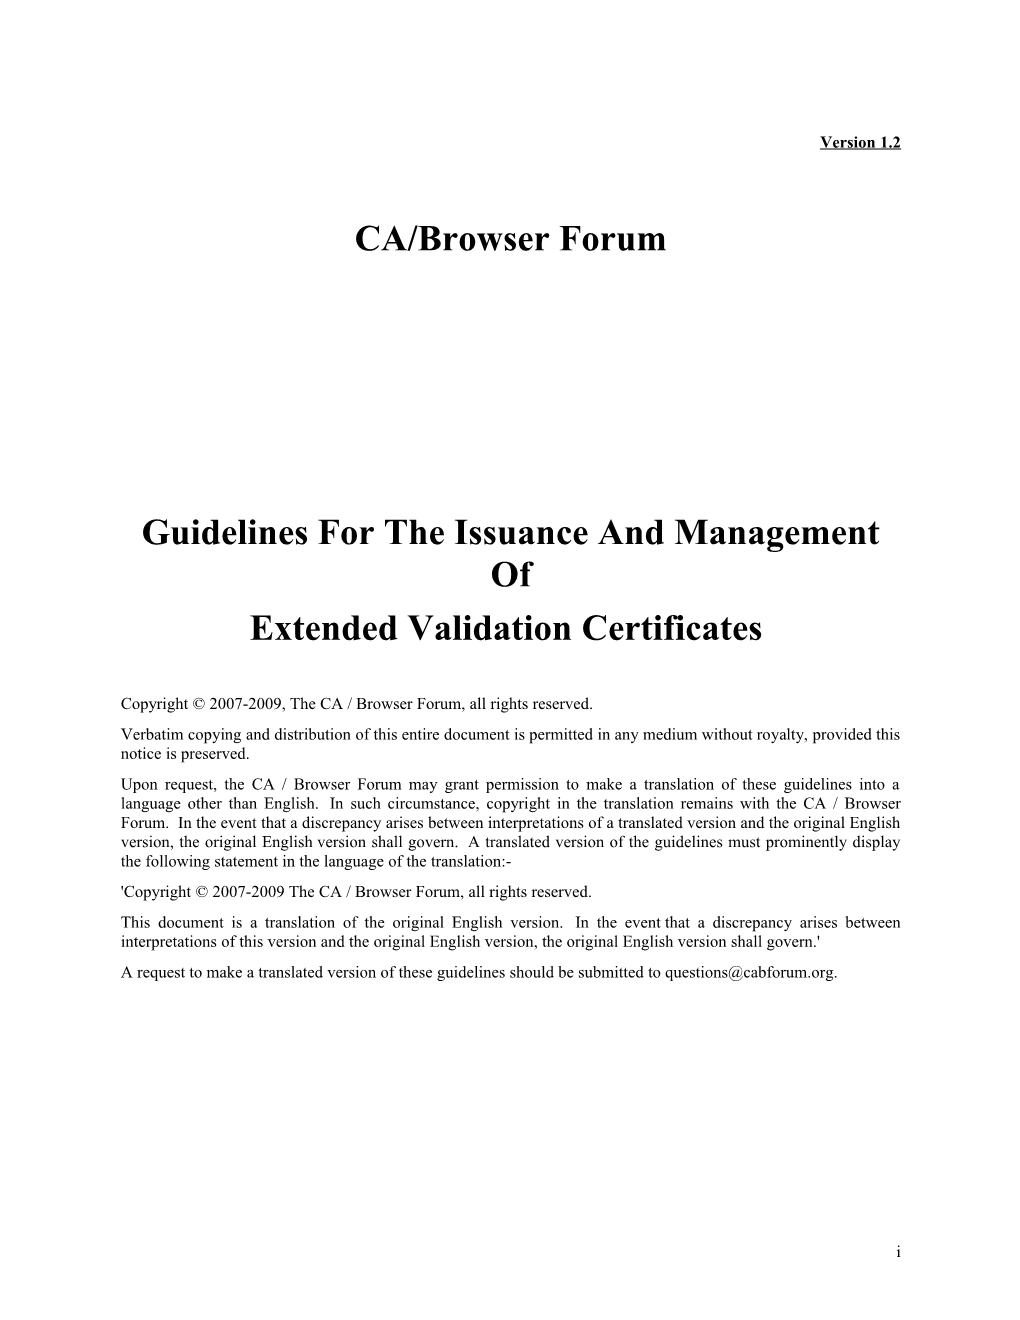 Guidelines for the Issuance and Management of Extended Validation Certificates